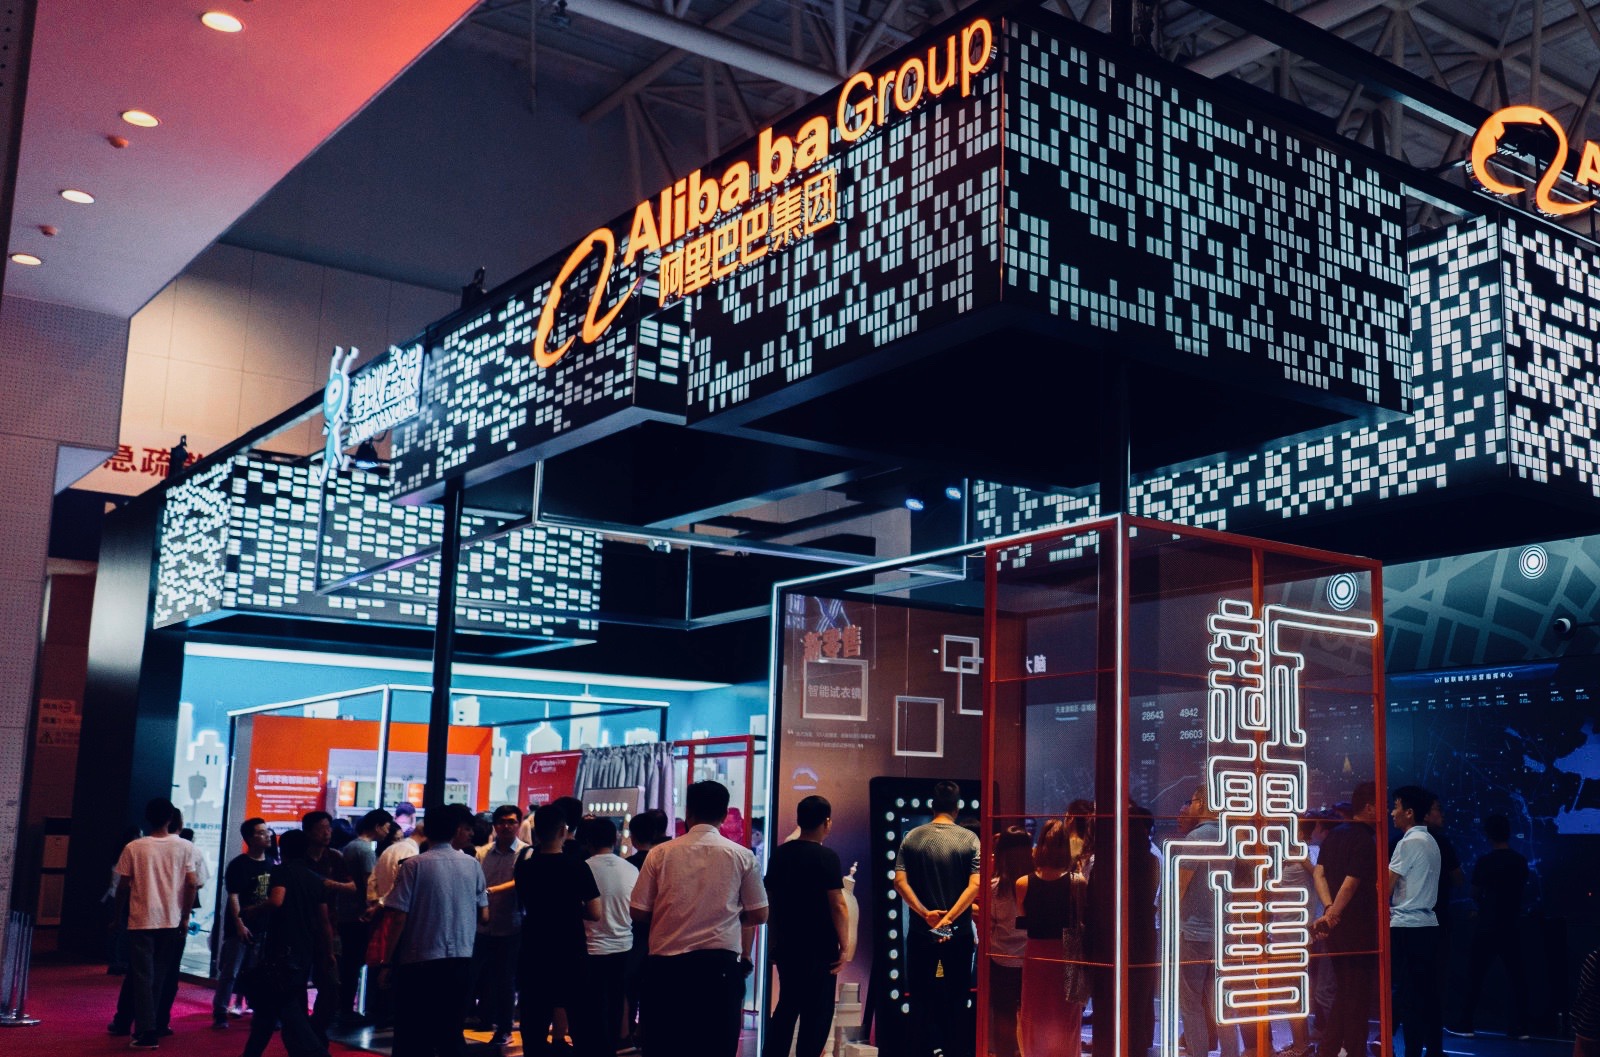 TIANJIN, CHINA - 2018/05/18: Alibaba shows its smart technology in e-commerce to the visitors.  The 2nd World Intelligence Congress  was held in Tianjin Meijiang Exhibition Center from May 16-18, 2018. (Photo by Zhang Peng/LightRocket via Getty Images)